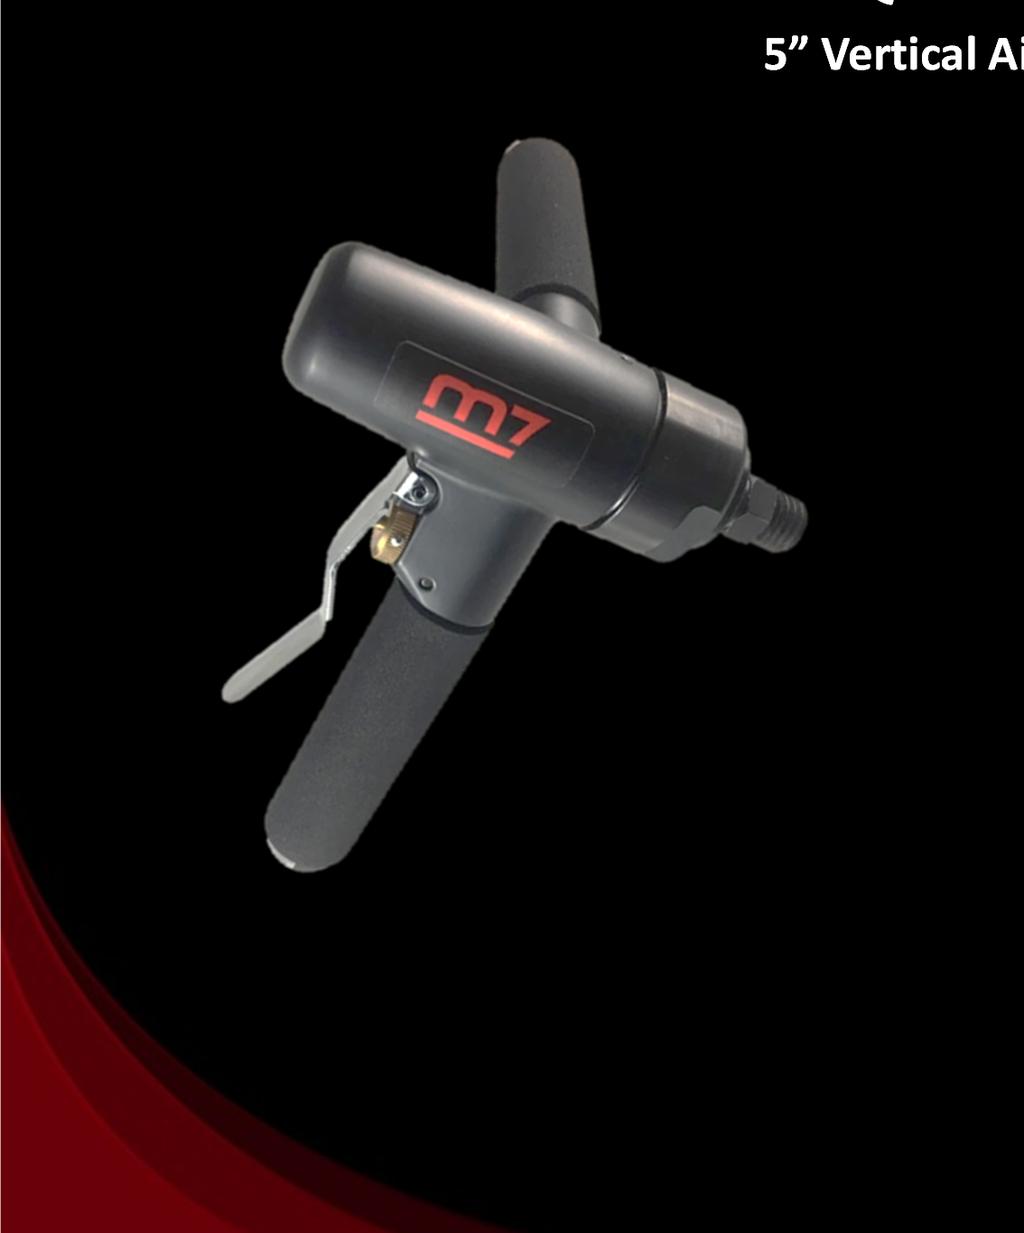 QP 335 5 Vertical Polisher Todays business climate demands air tools to be built for safer operation compared to years past and that triggered m7 to offer a lightweight, quiet running and yet